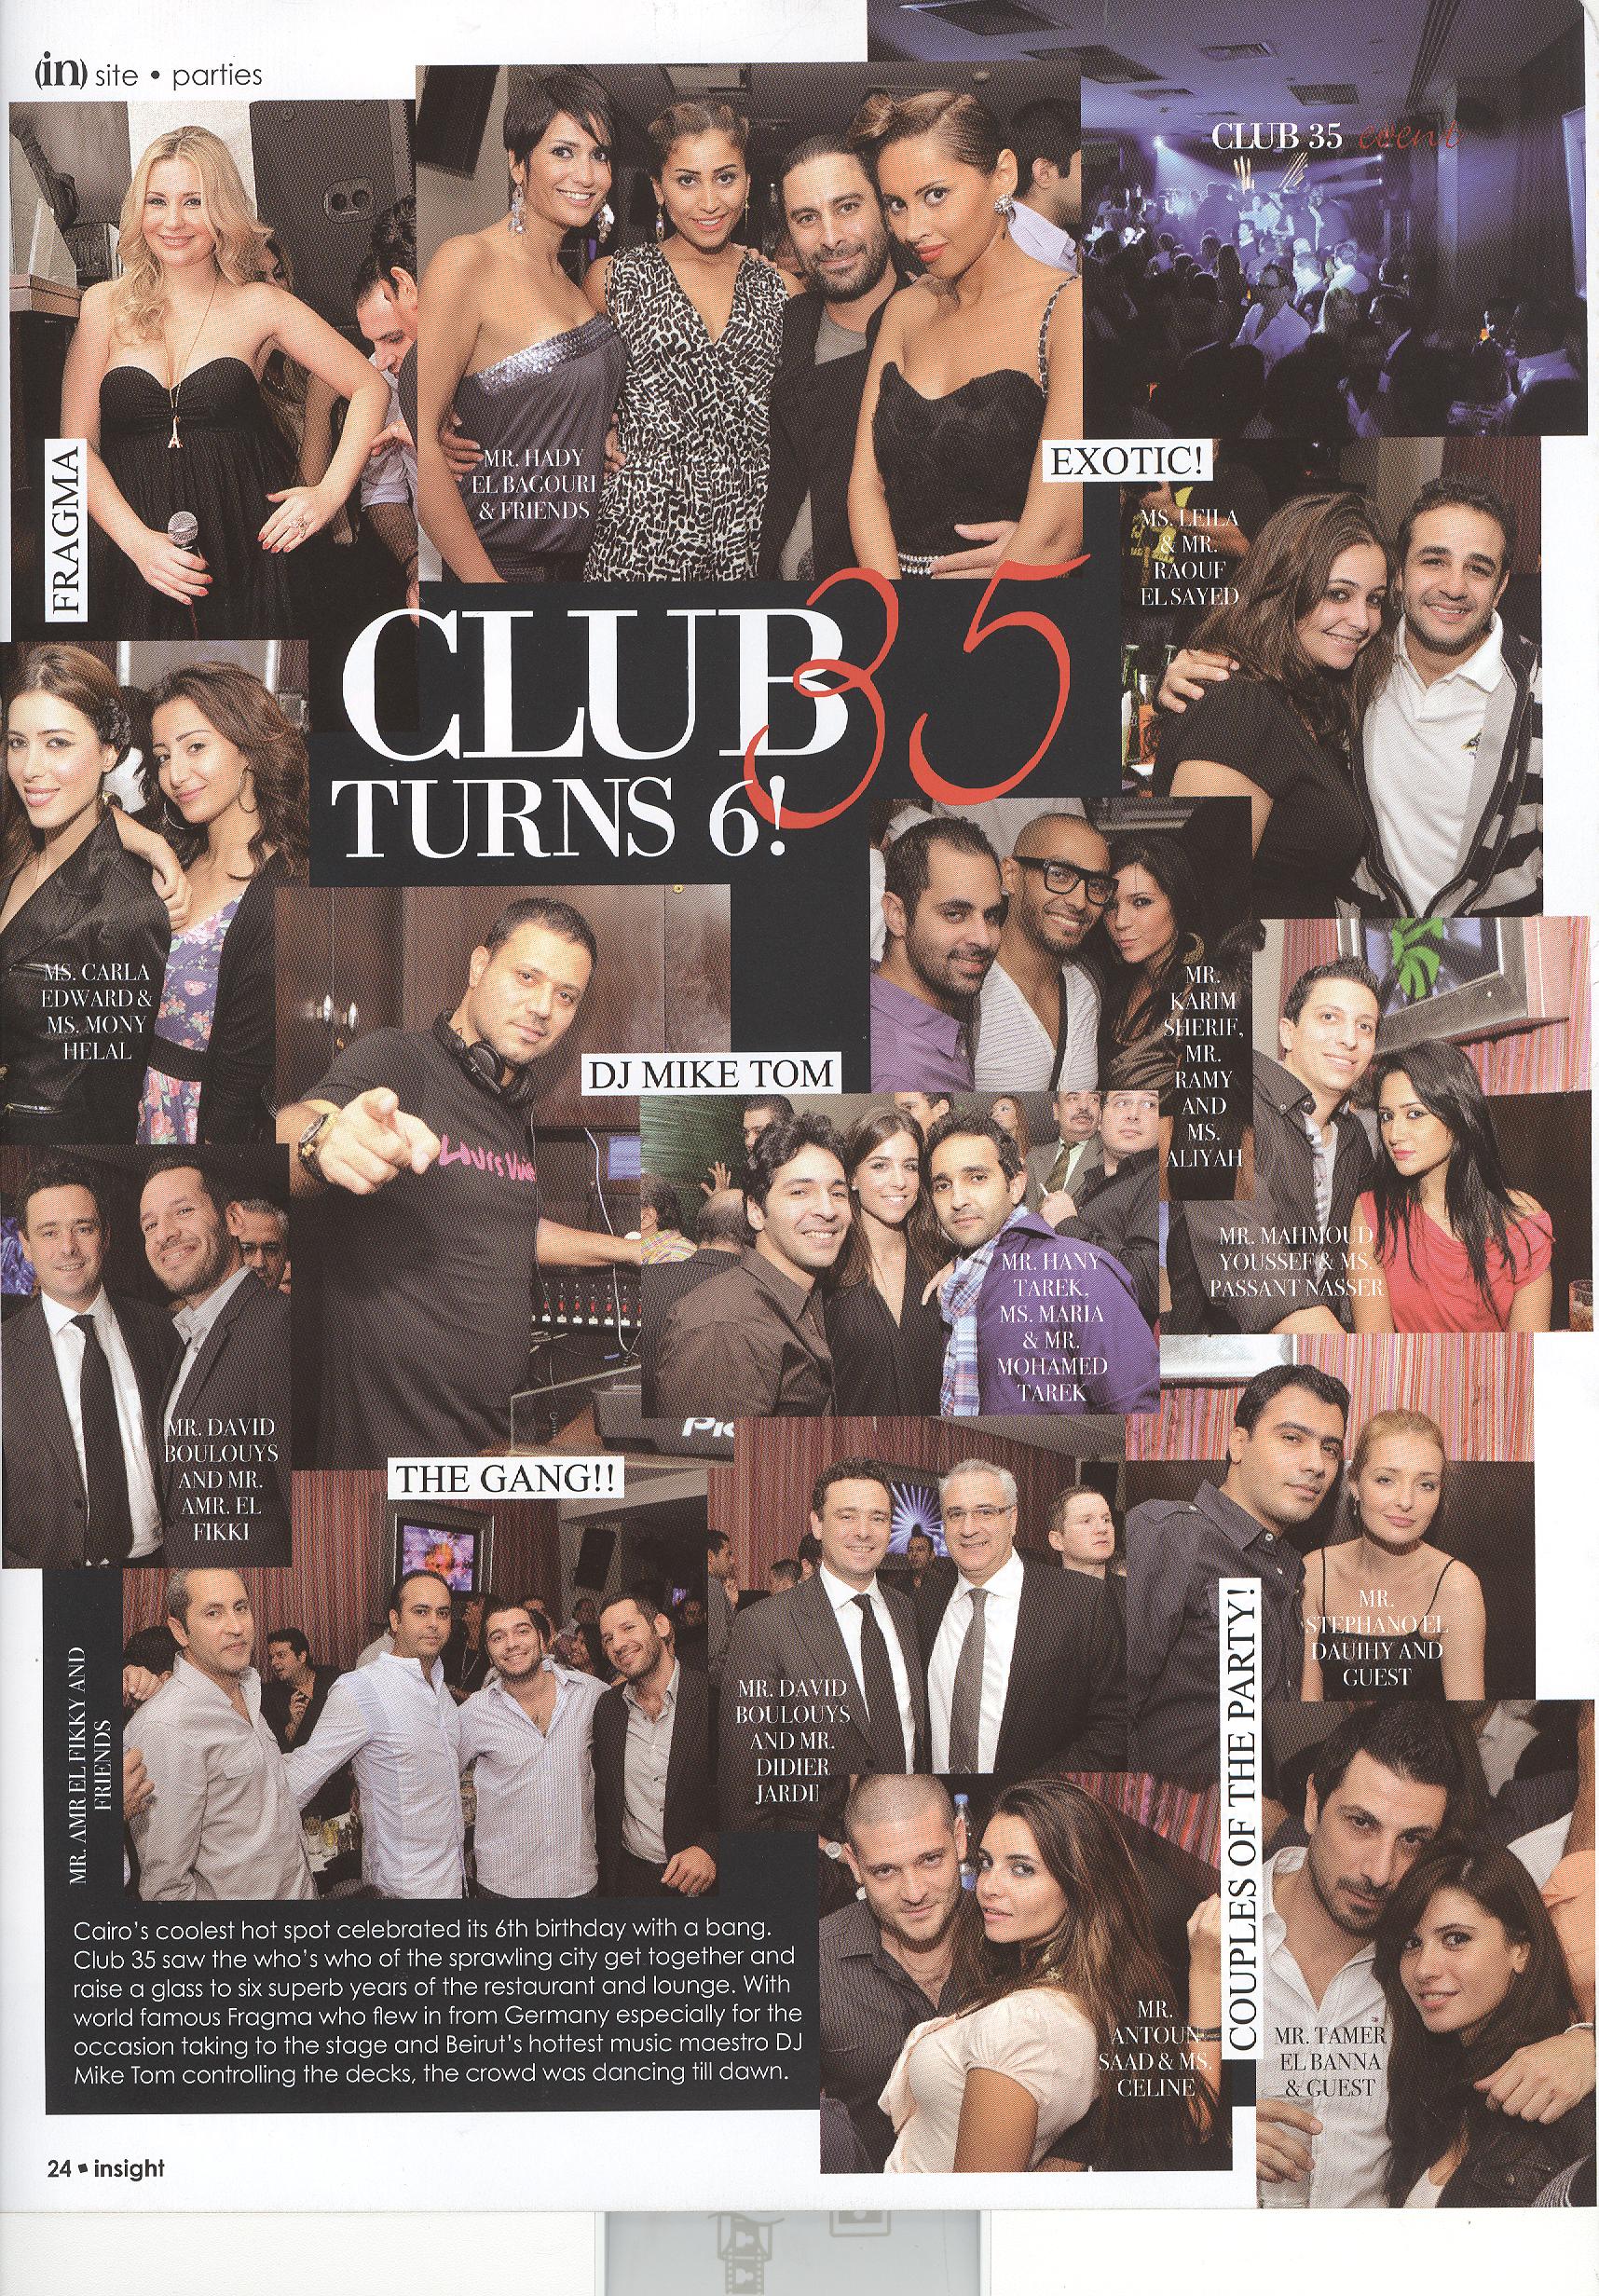 Club 35 anniversary in insight mag.